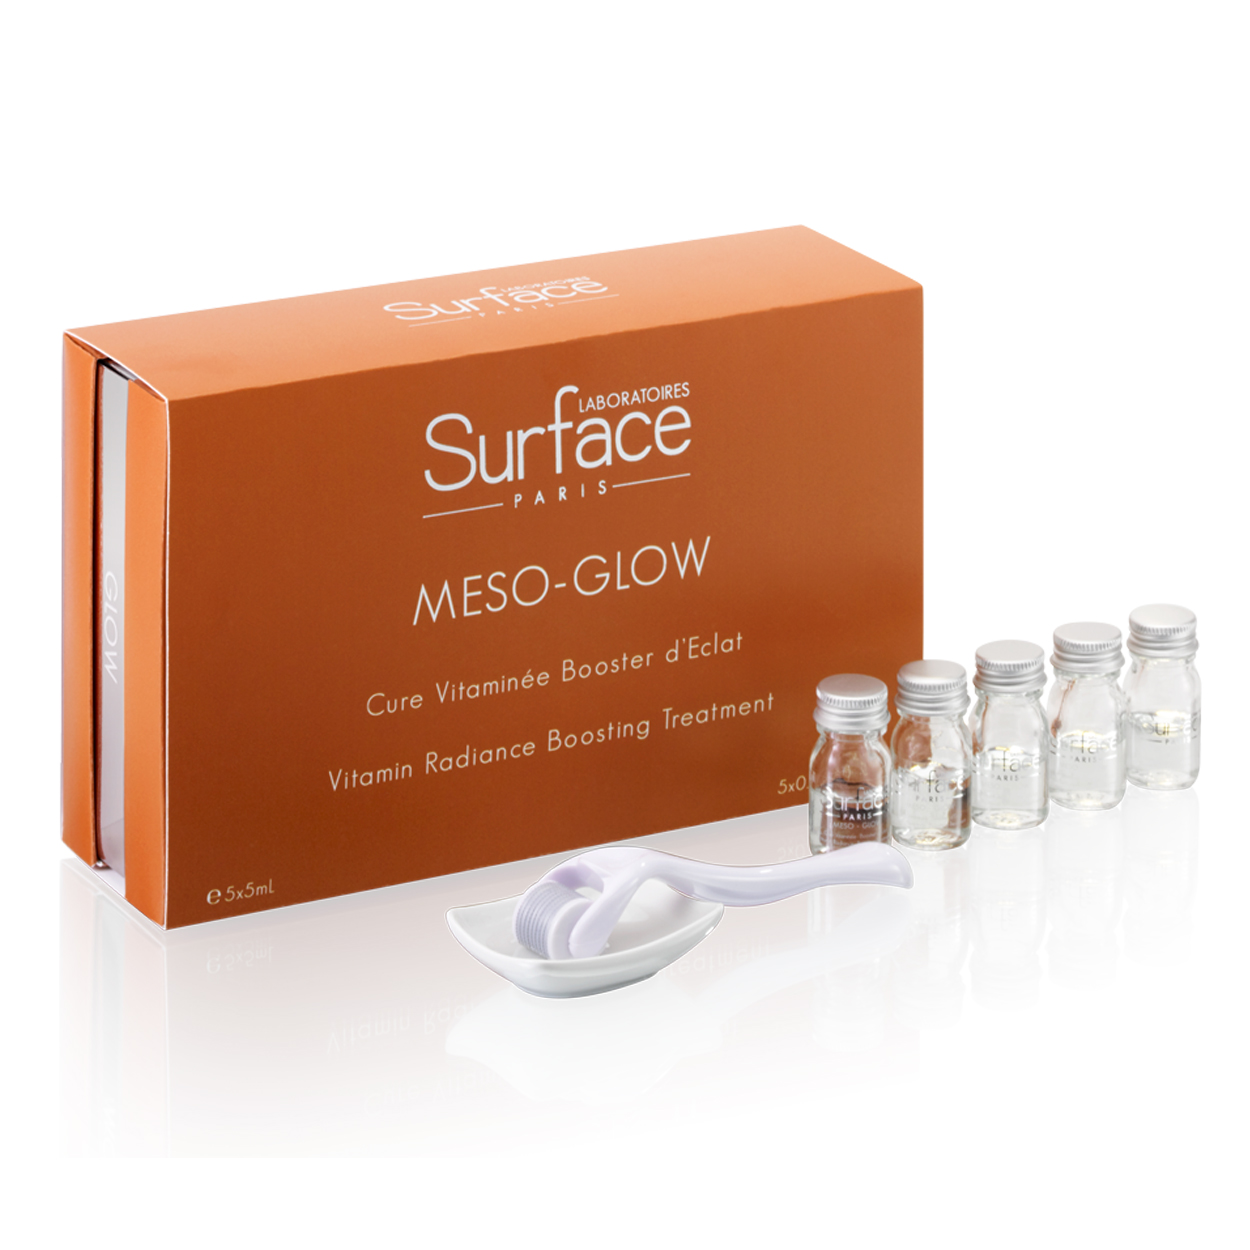 At-Home Mesotherapy - MESO-GLOW by Laboratoires Surface-Paris